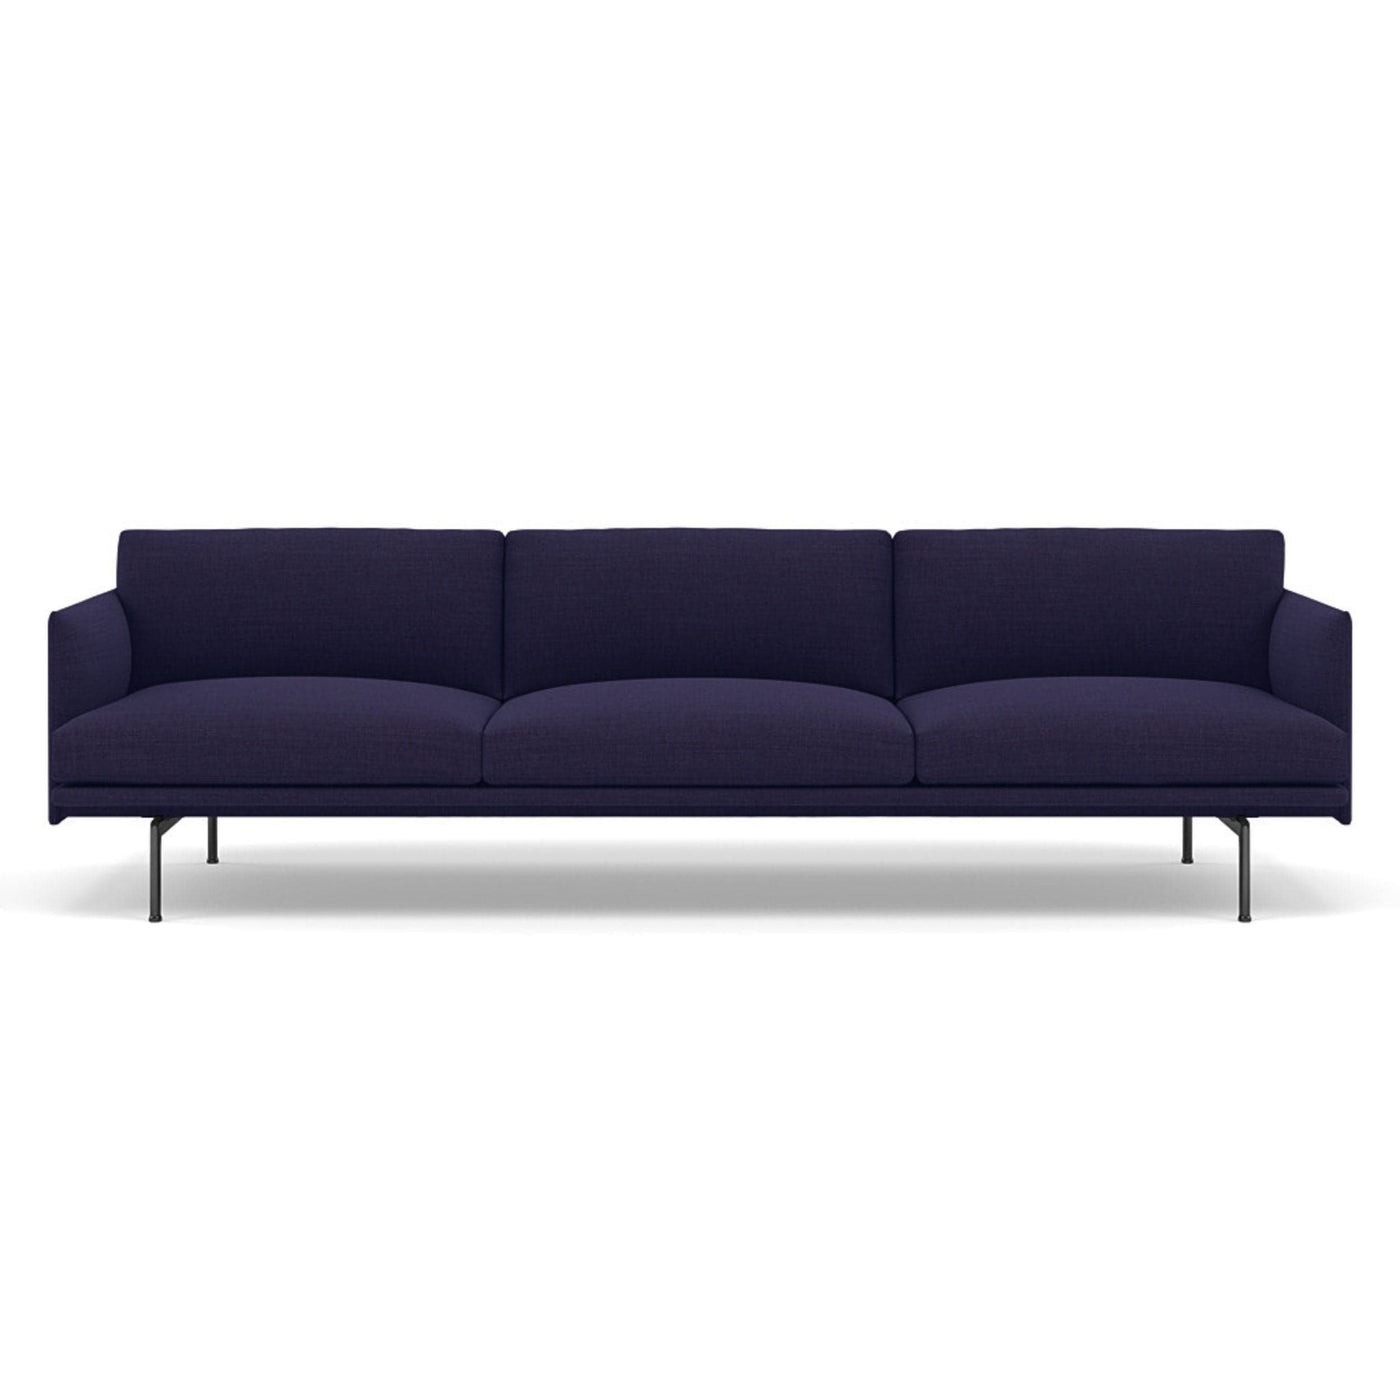 muuto outline 3.5 seater sofa in canvas 684 blue and black legs. Made to order from someday designs. #colour_canvas-684-blue